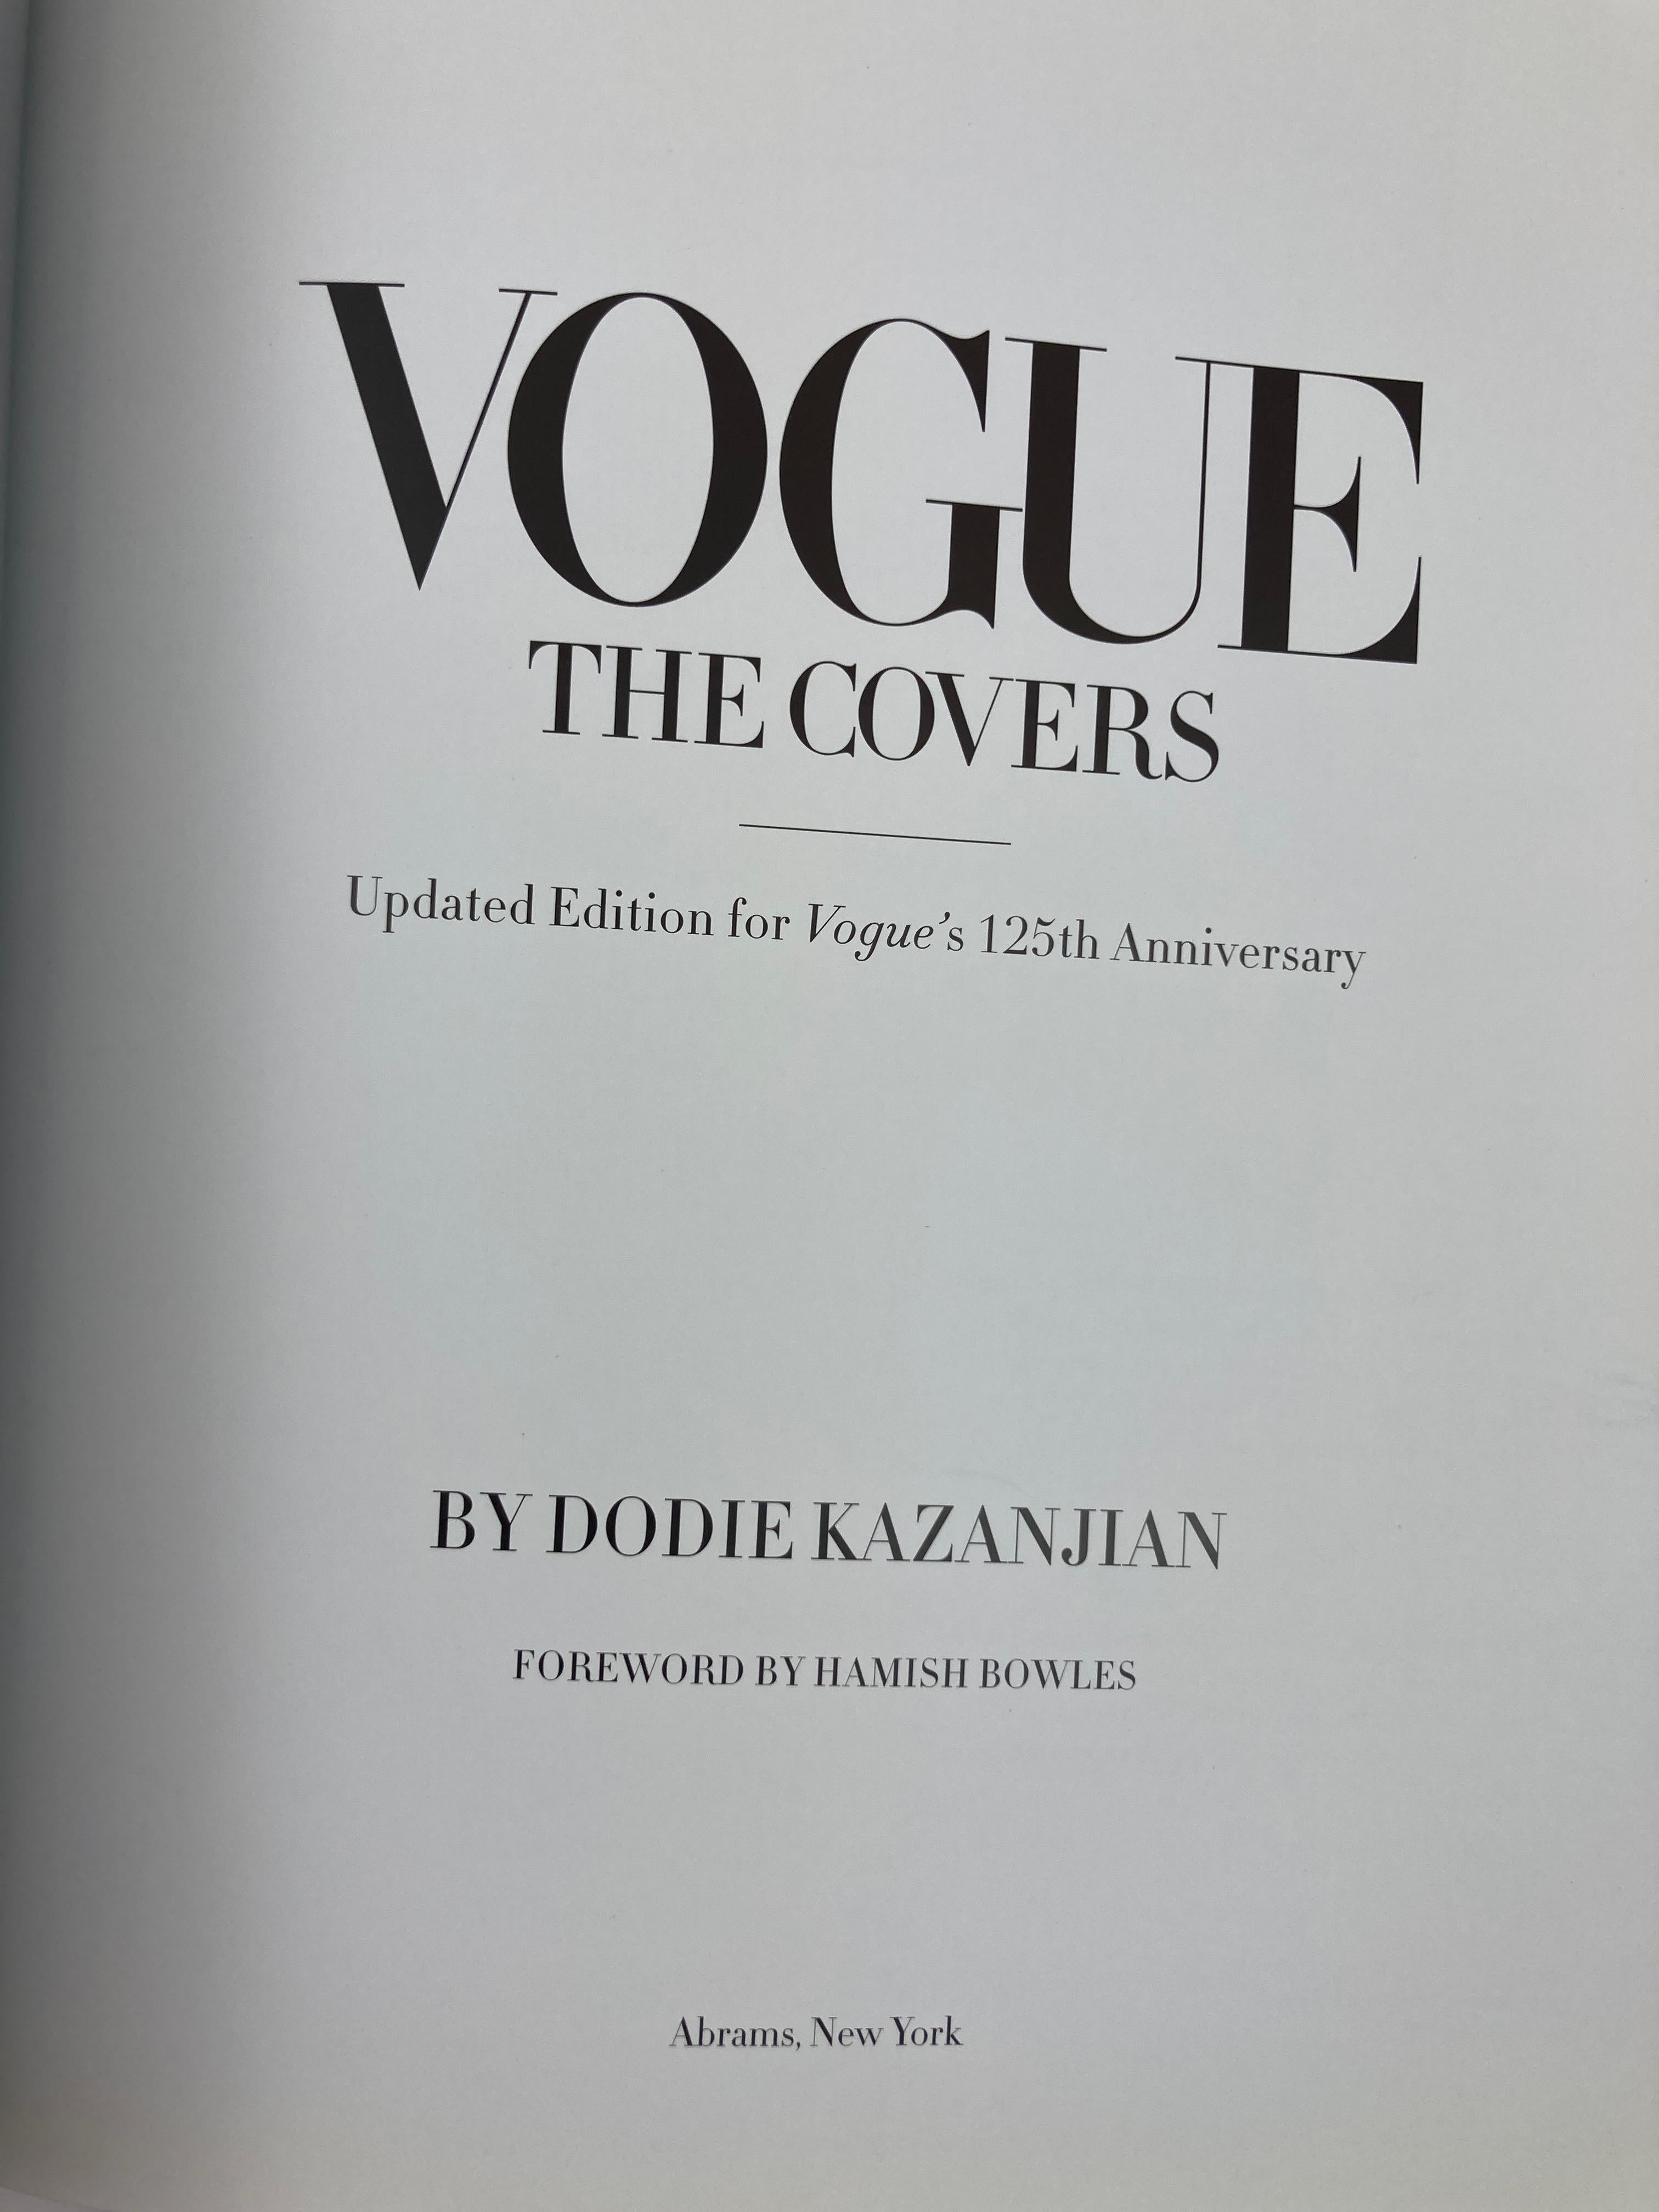 Vogue The Covers, Hardcover-Couchtischbuch im Angebot 4